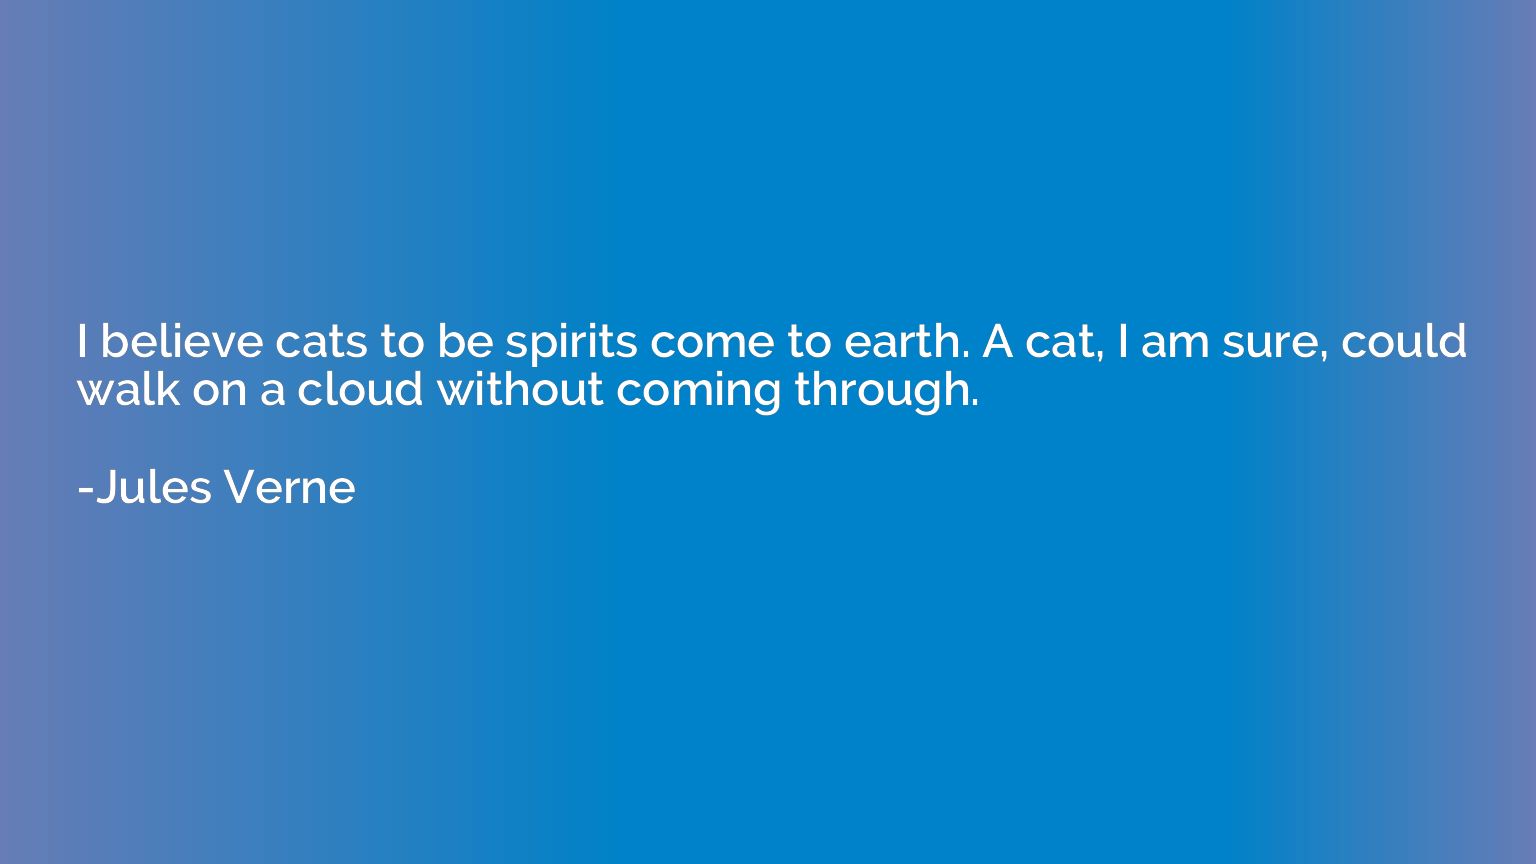 I believe cats to be spirits come to earth. A cat, I am sure